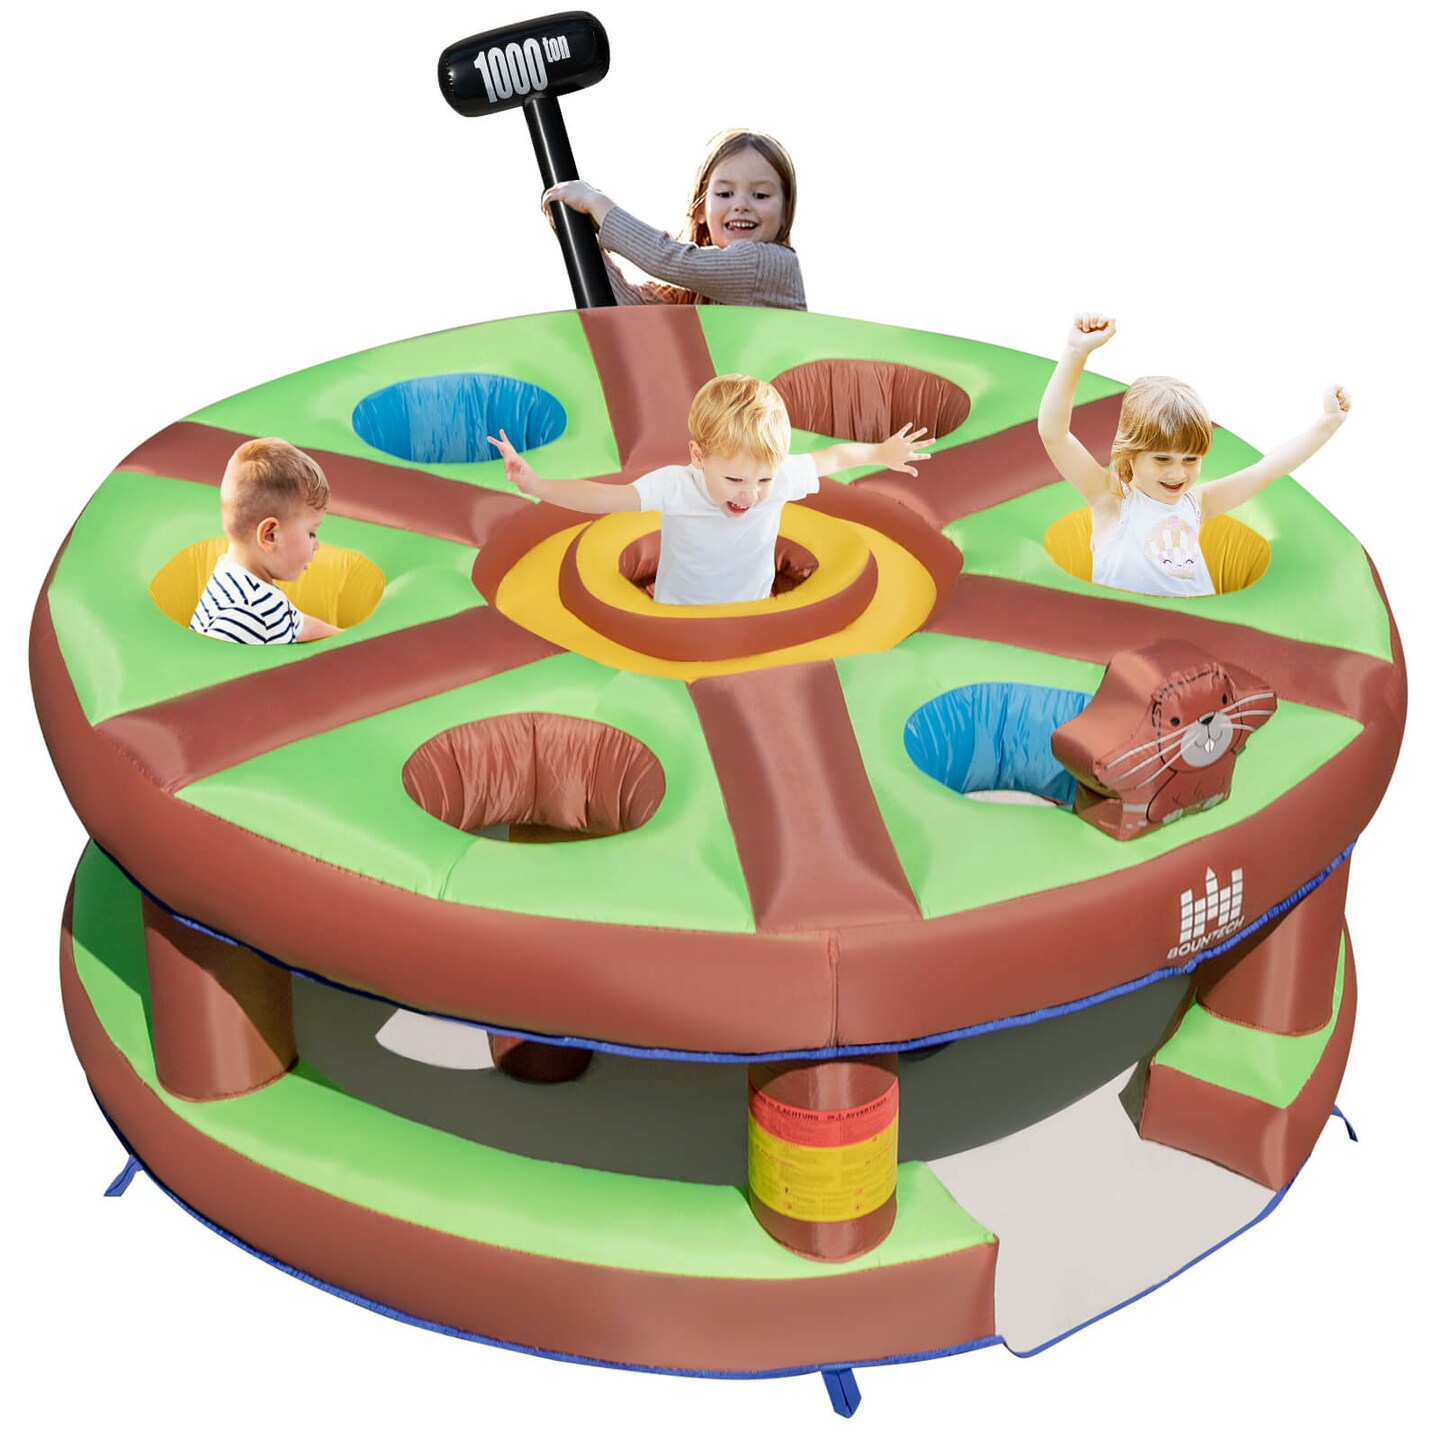 Human Whack a Mole (7 Player Game)